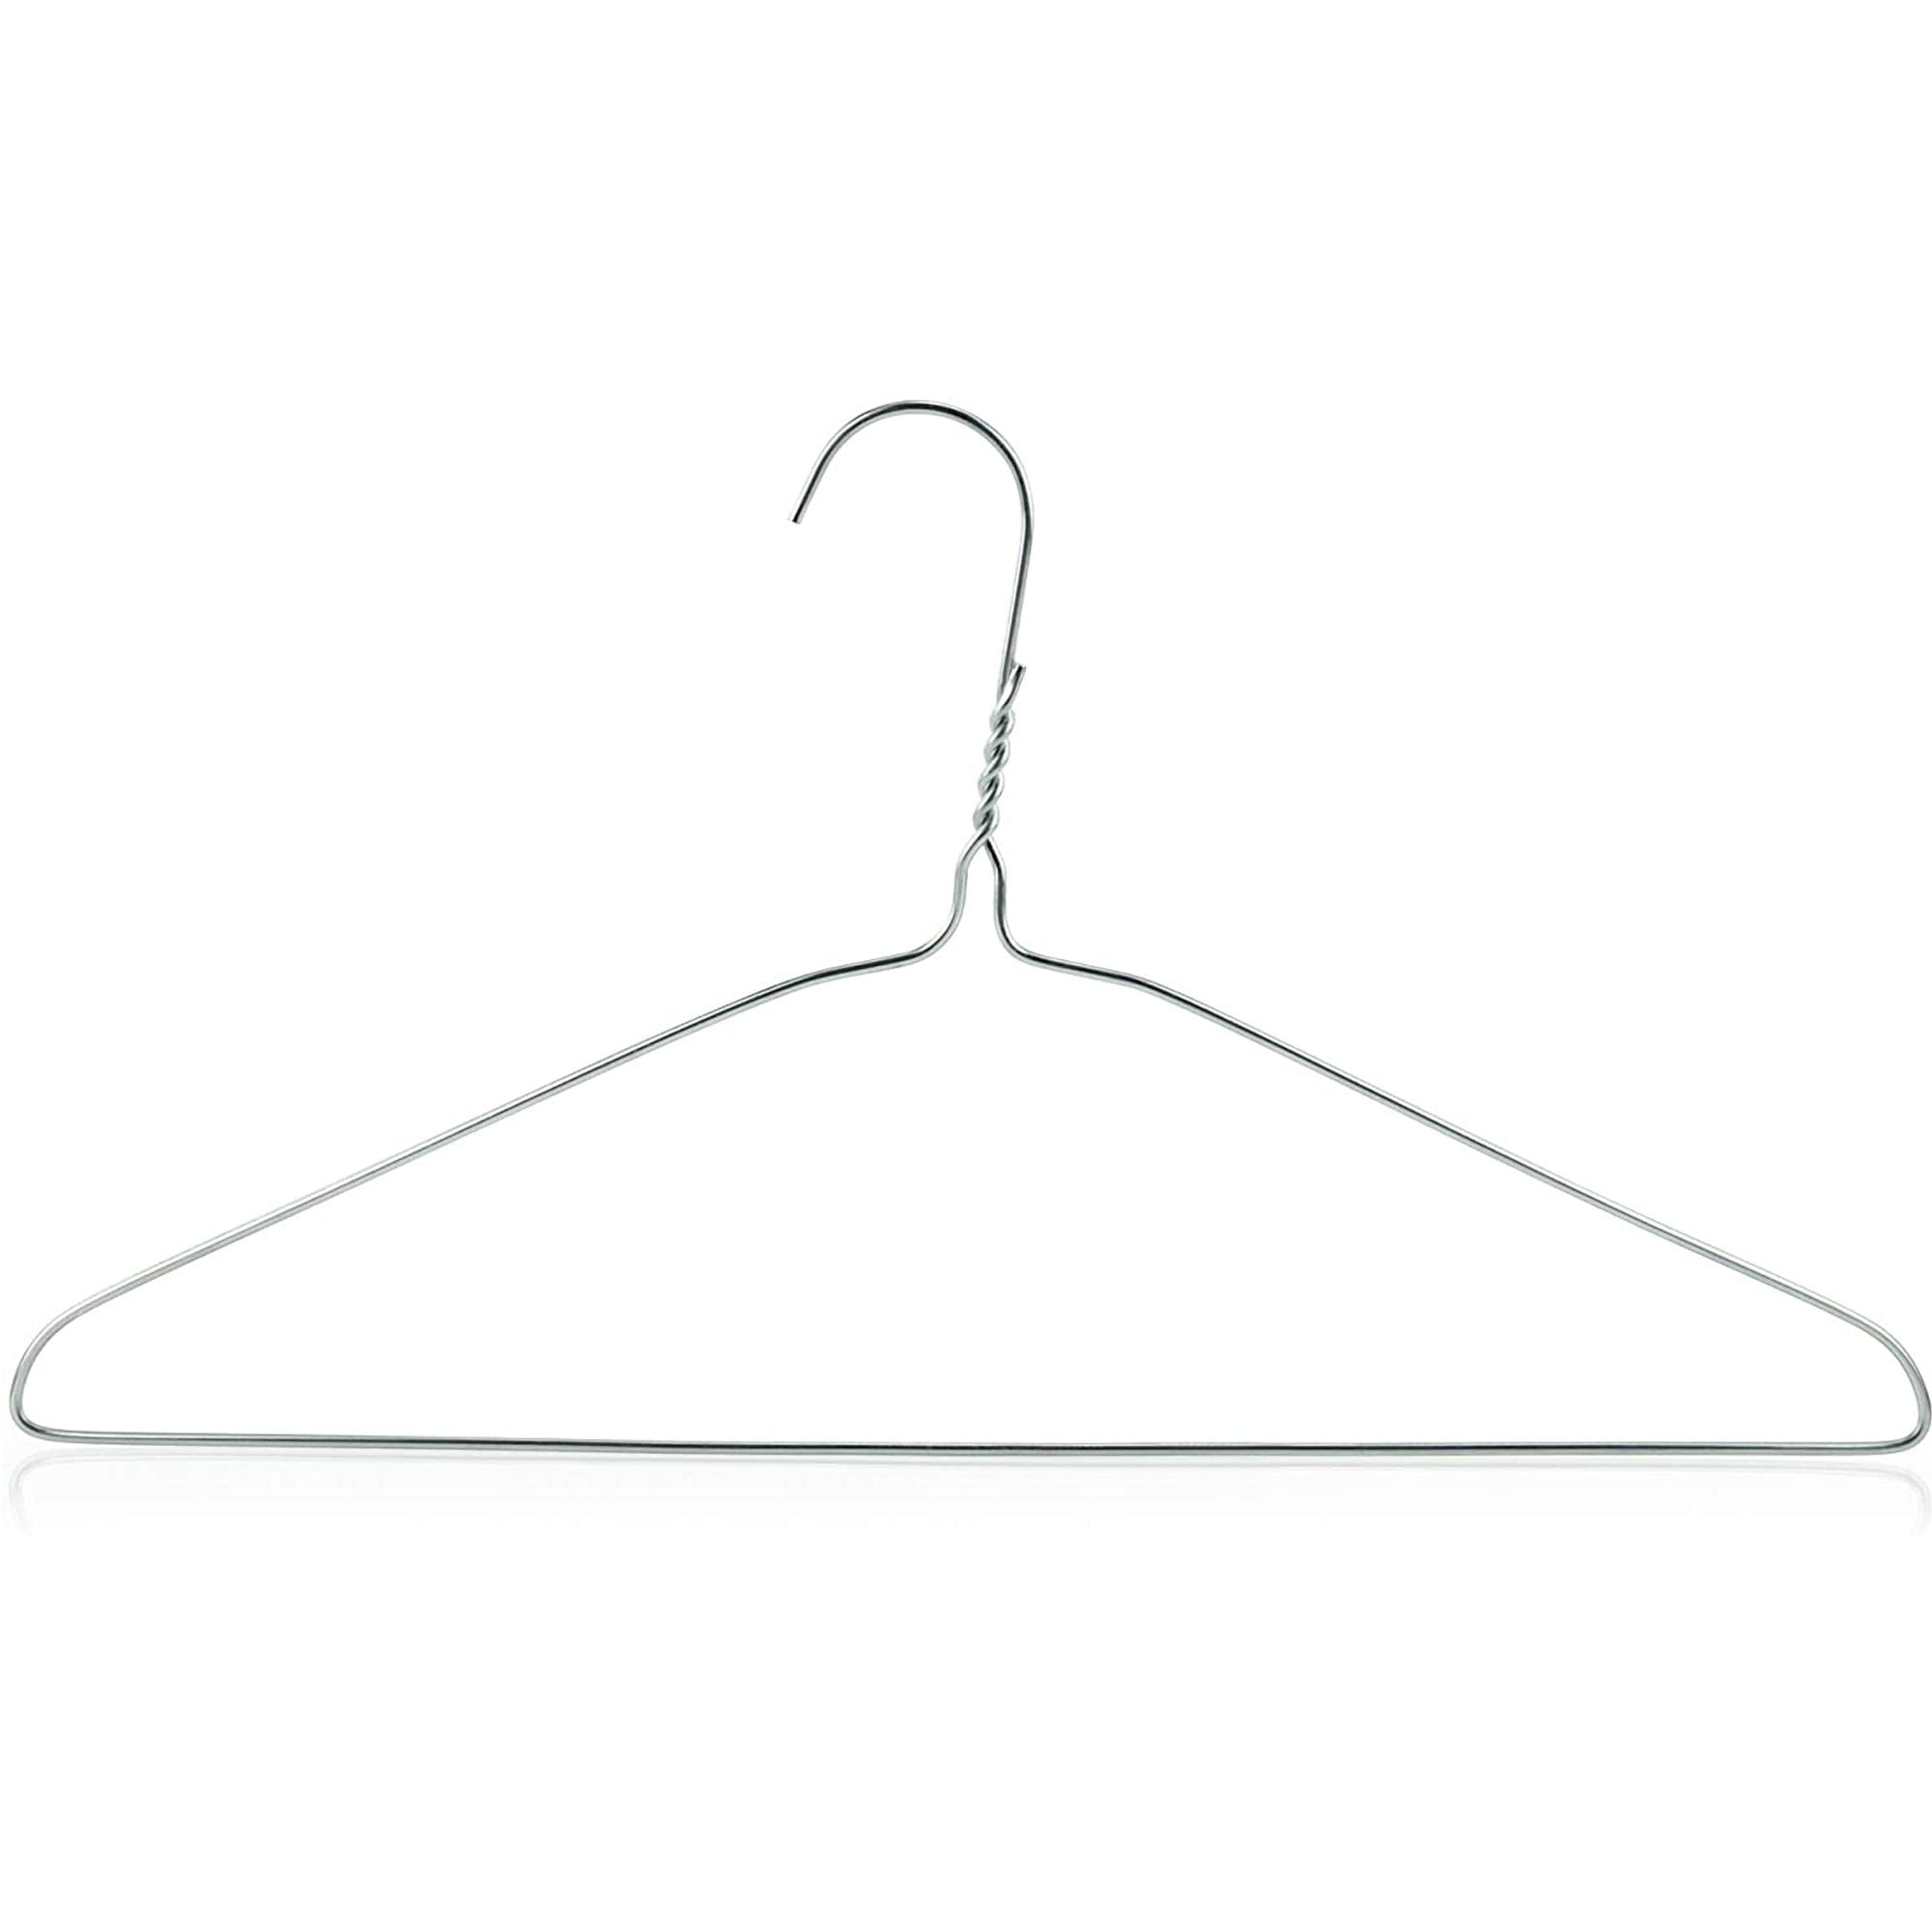 Steel Wire Shirt Hangers Size 16" 13 New 30 Sturdy Silver color like Chrome 